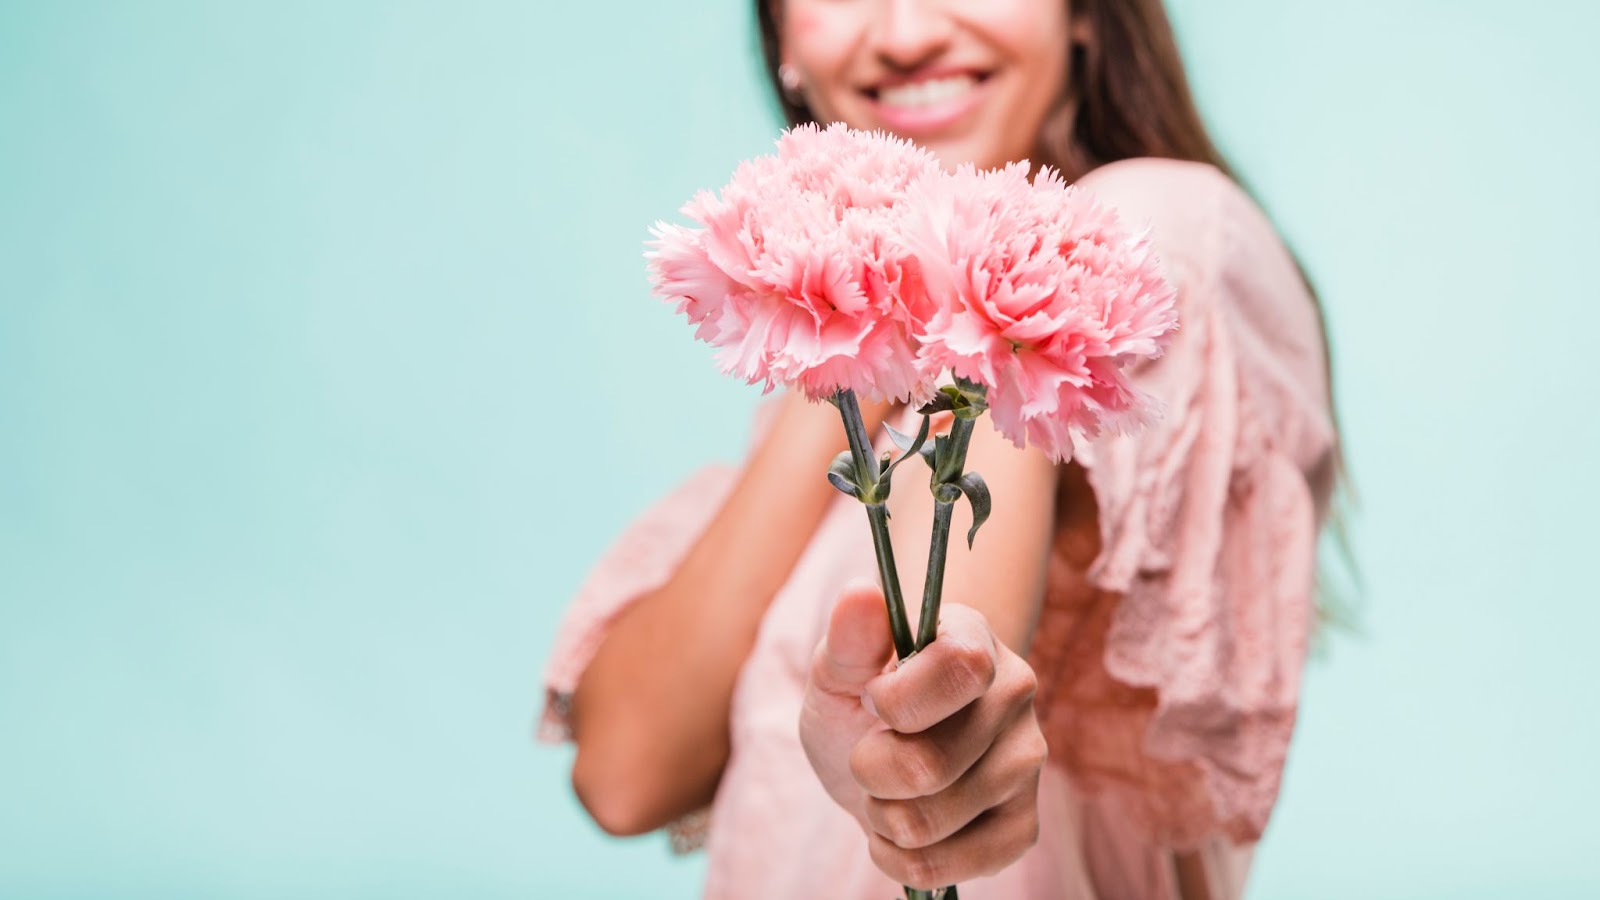 Carnation Flowers And Their Meaning: 11 Things You Need To Know